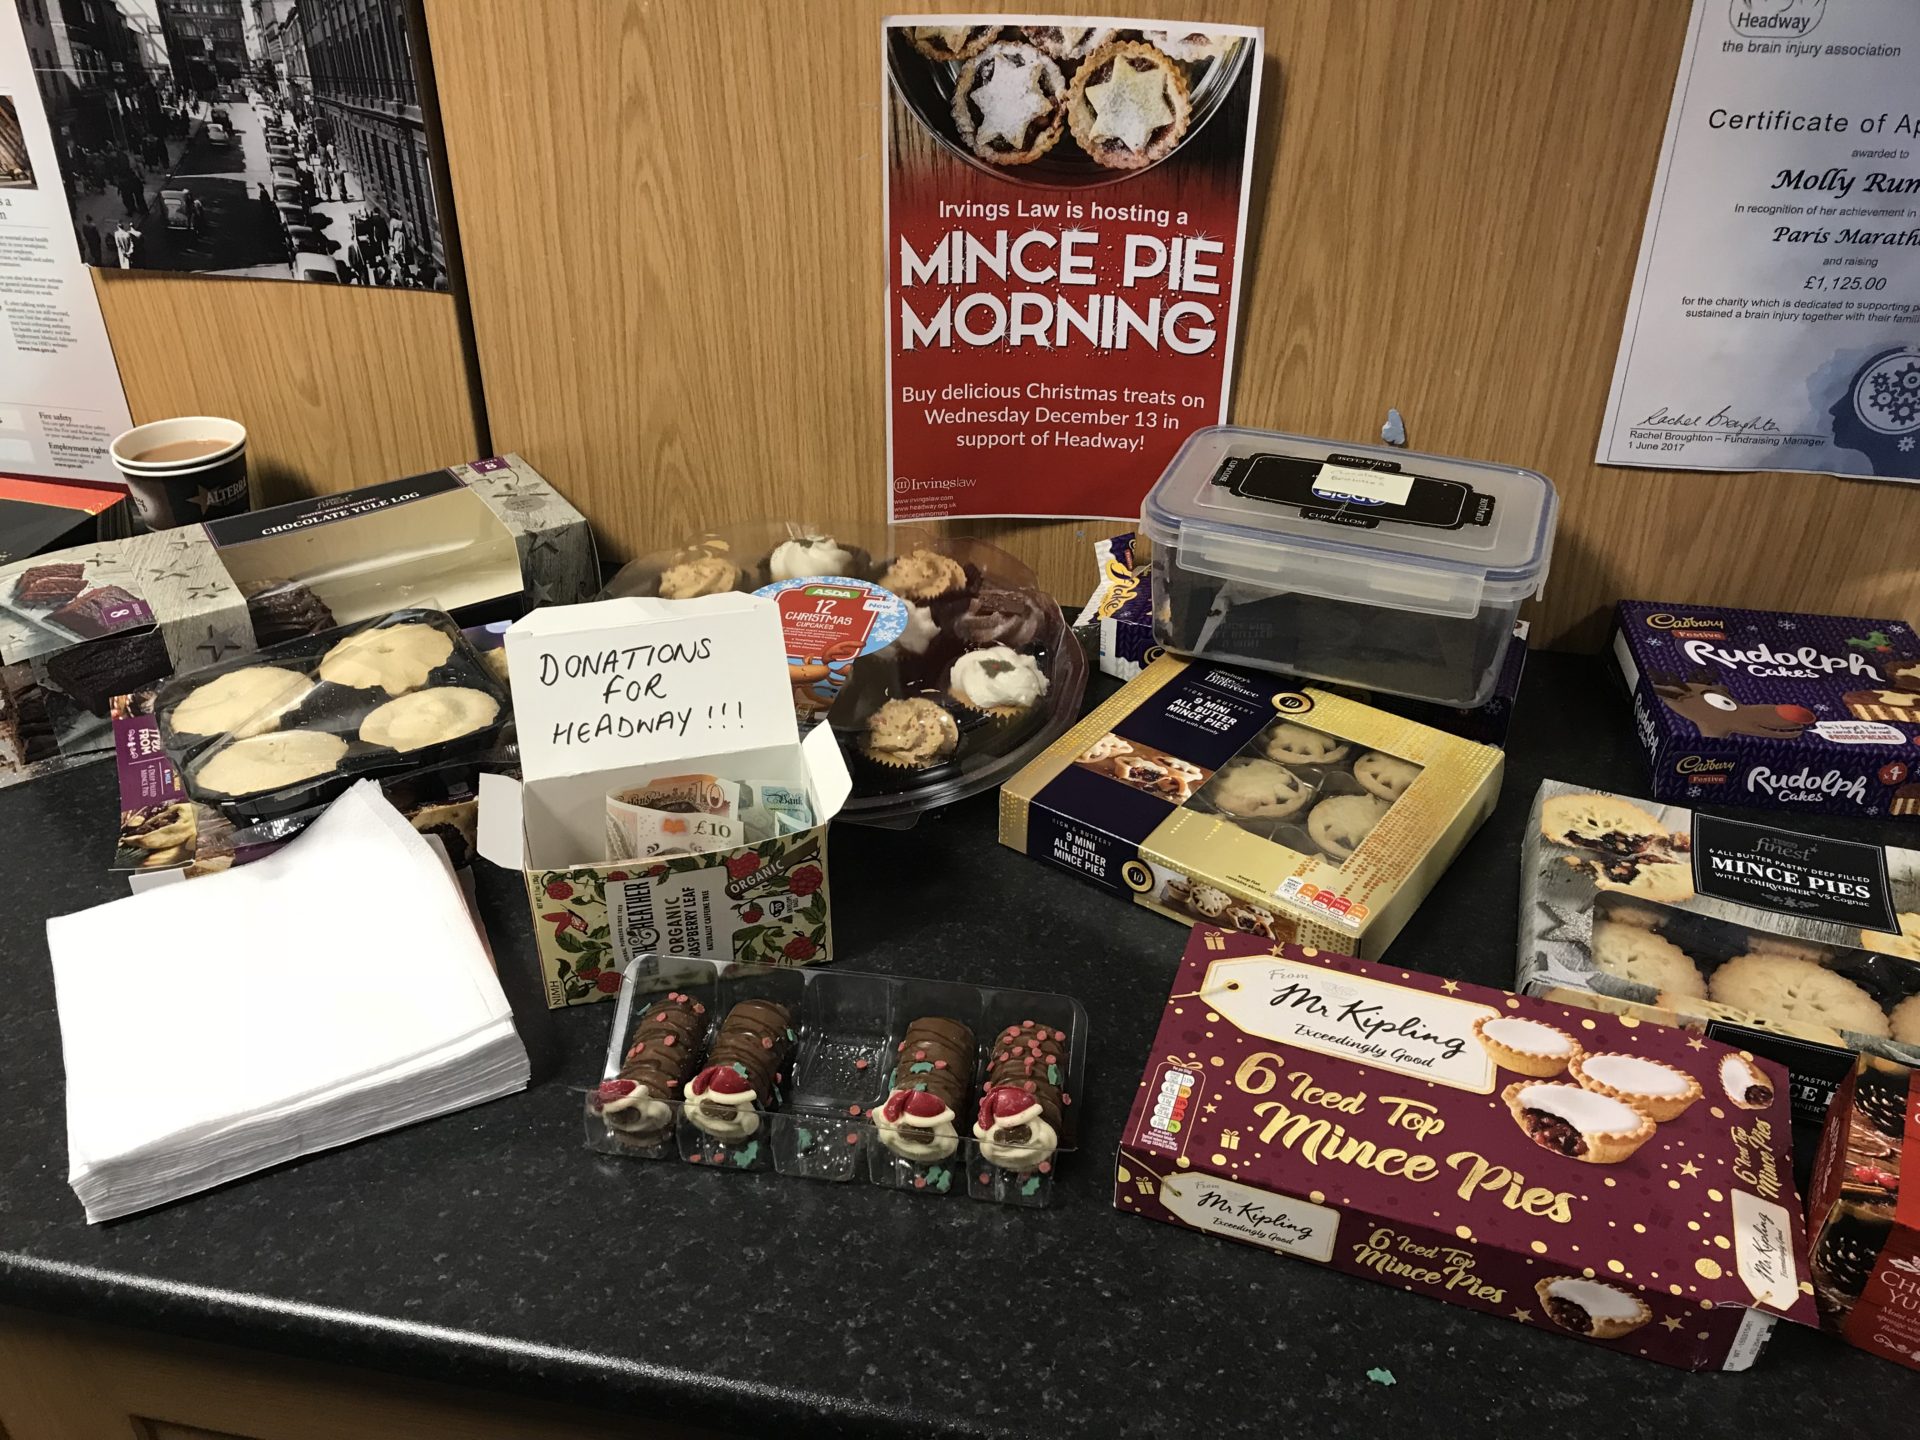 Irvings Raises Money with Mince Pies for Charity